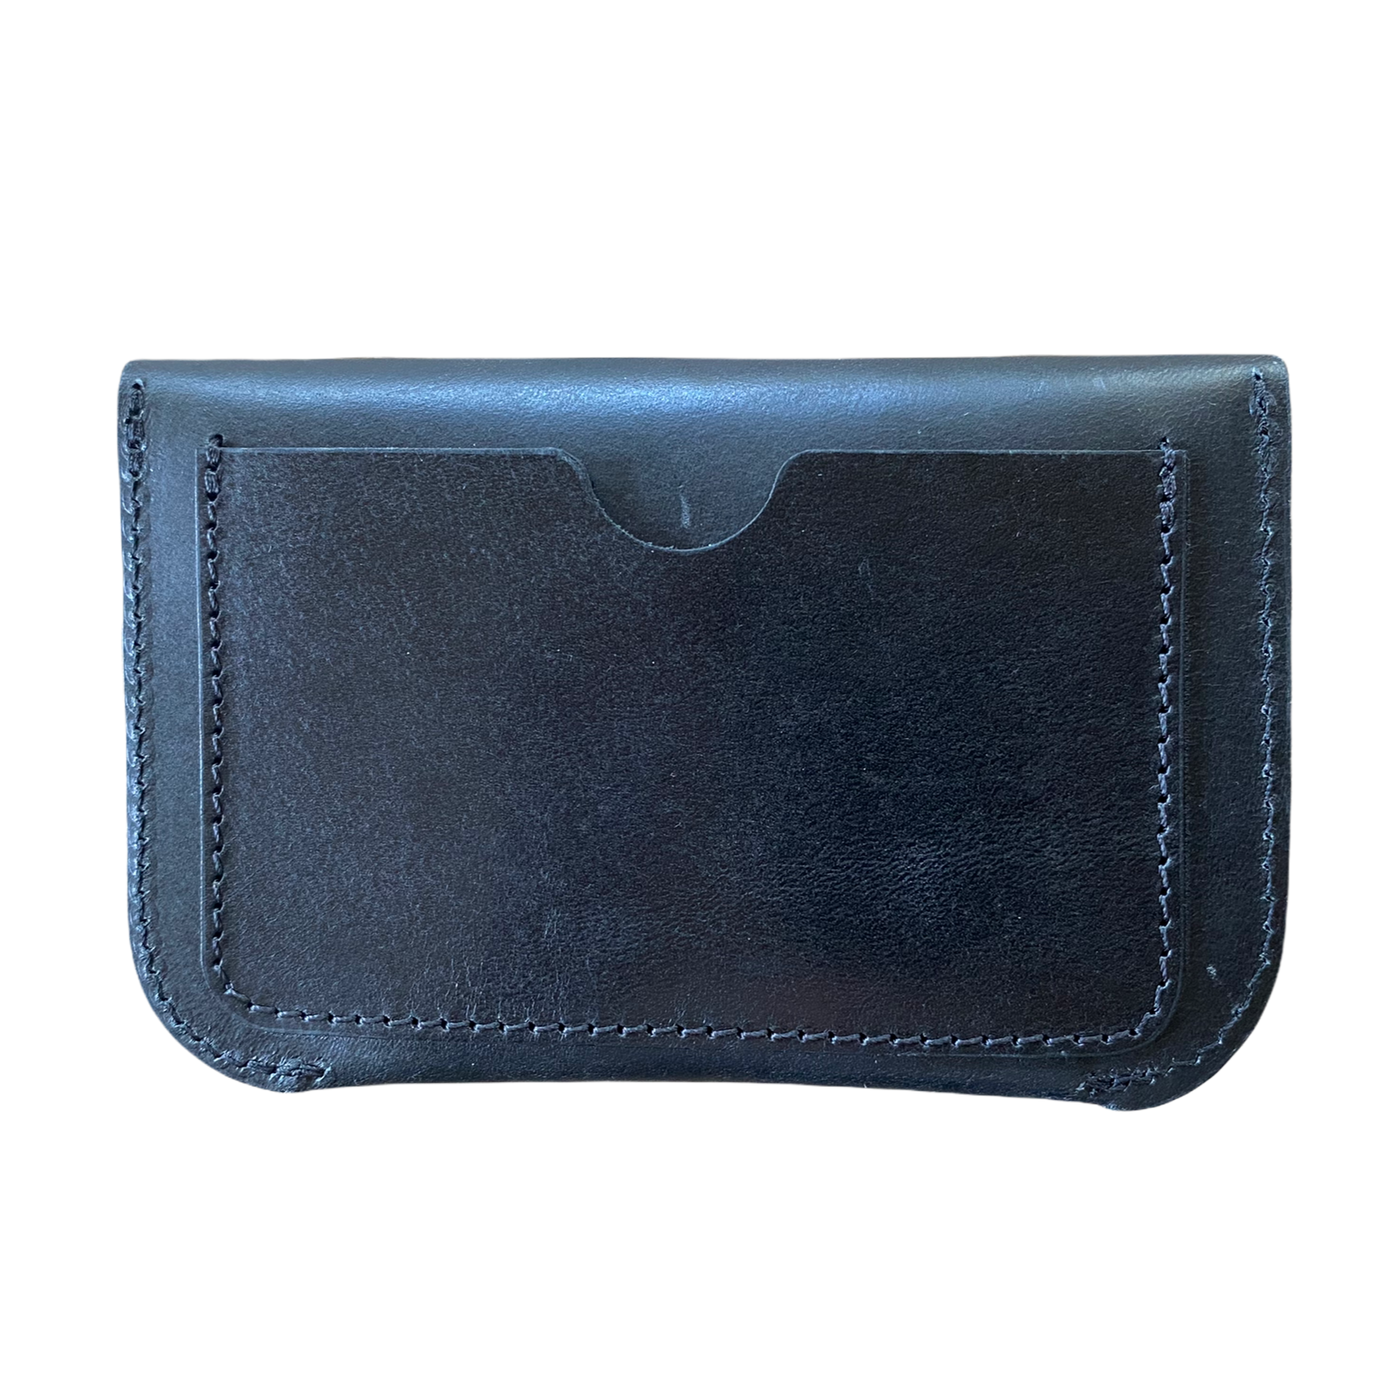 Driver's Wallet